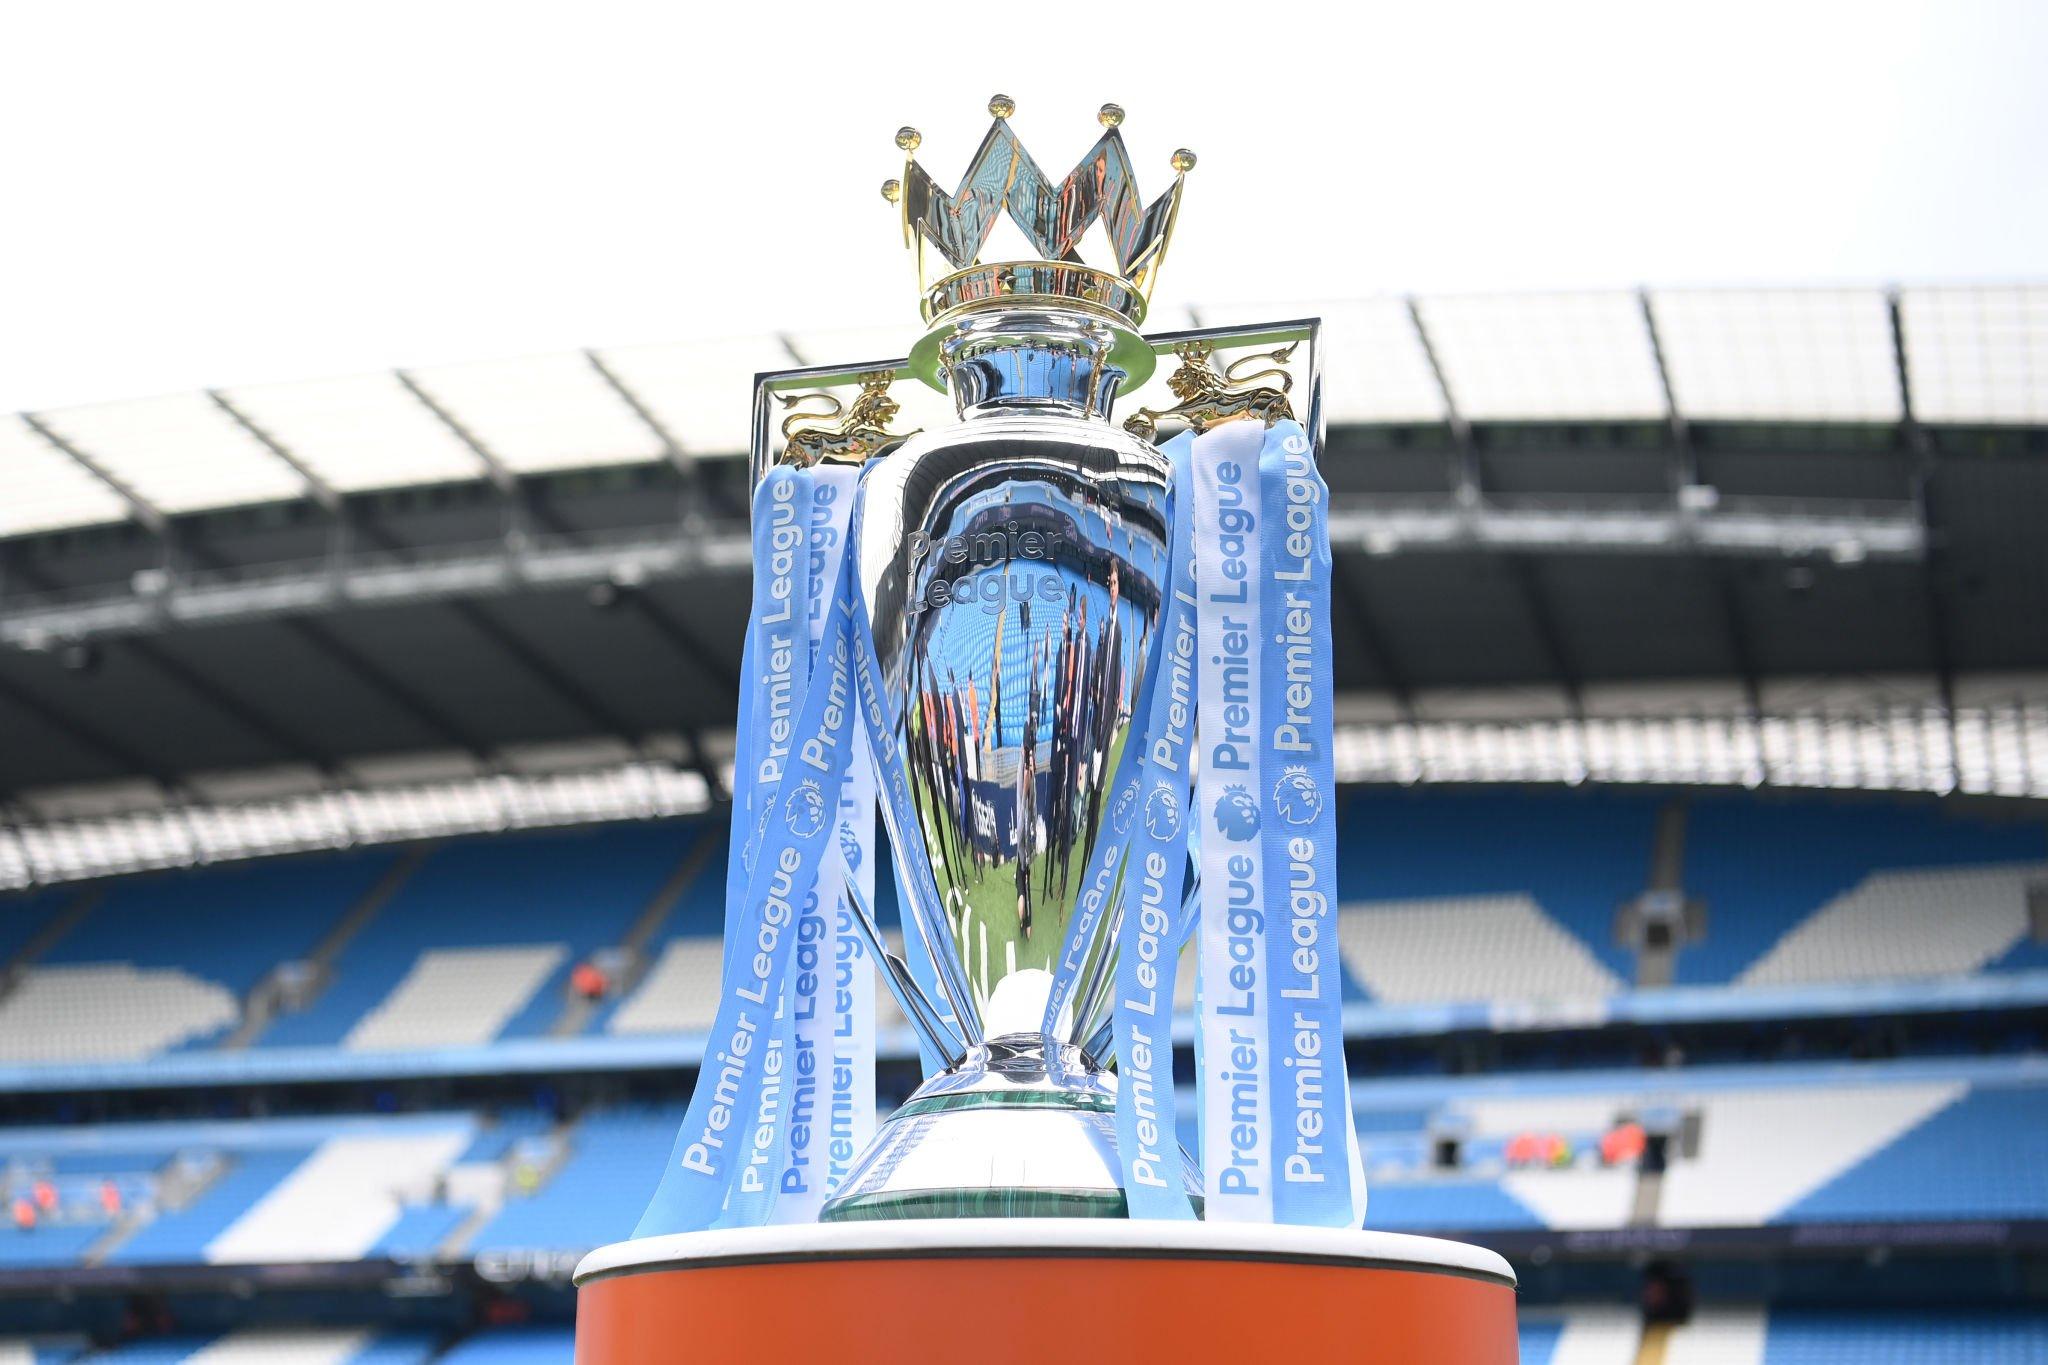 MANCHESTER, ENGLAND - MAY 22: A detailed view of the Premier League trophy prior to the Premier League match between Manchester City and Aston Villa at Etihad Stadium on May 22, 2022 in Manchester, England. (Photo by Michael Regan/Getty Images)